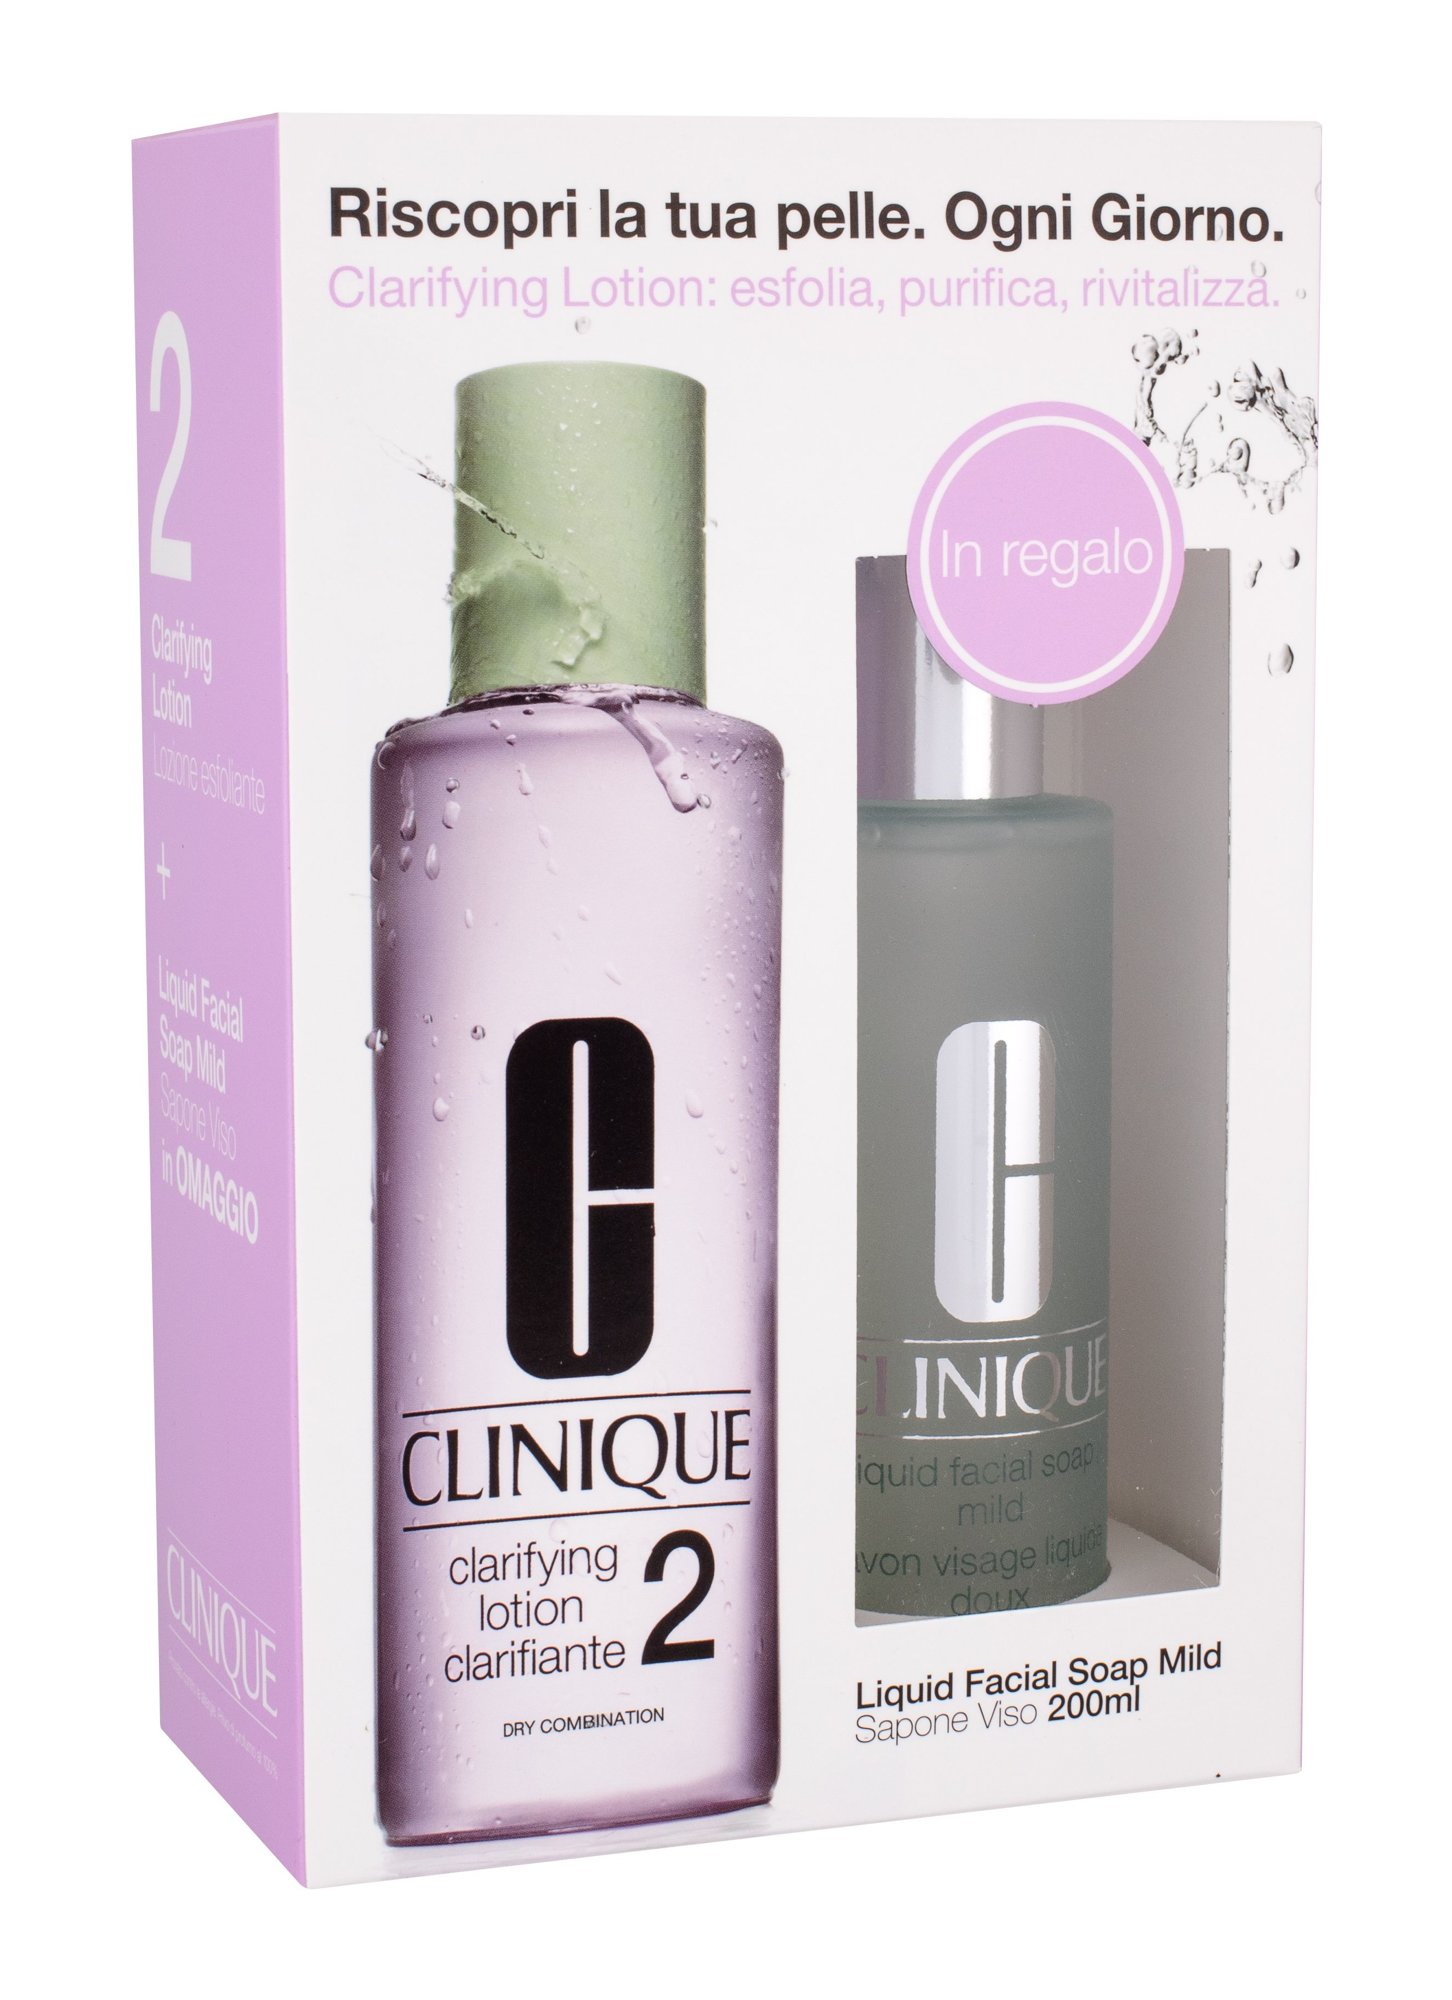 Clinique 3-Step Skin Care 2 400ml Cleansing water Clarifying Lotion 2 400 ml + Cleansing gel All About Clean Liquid Facial Soap Mild 200 ml valomasis vanduo veidui Rinkinys